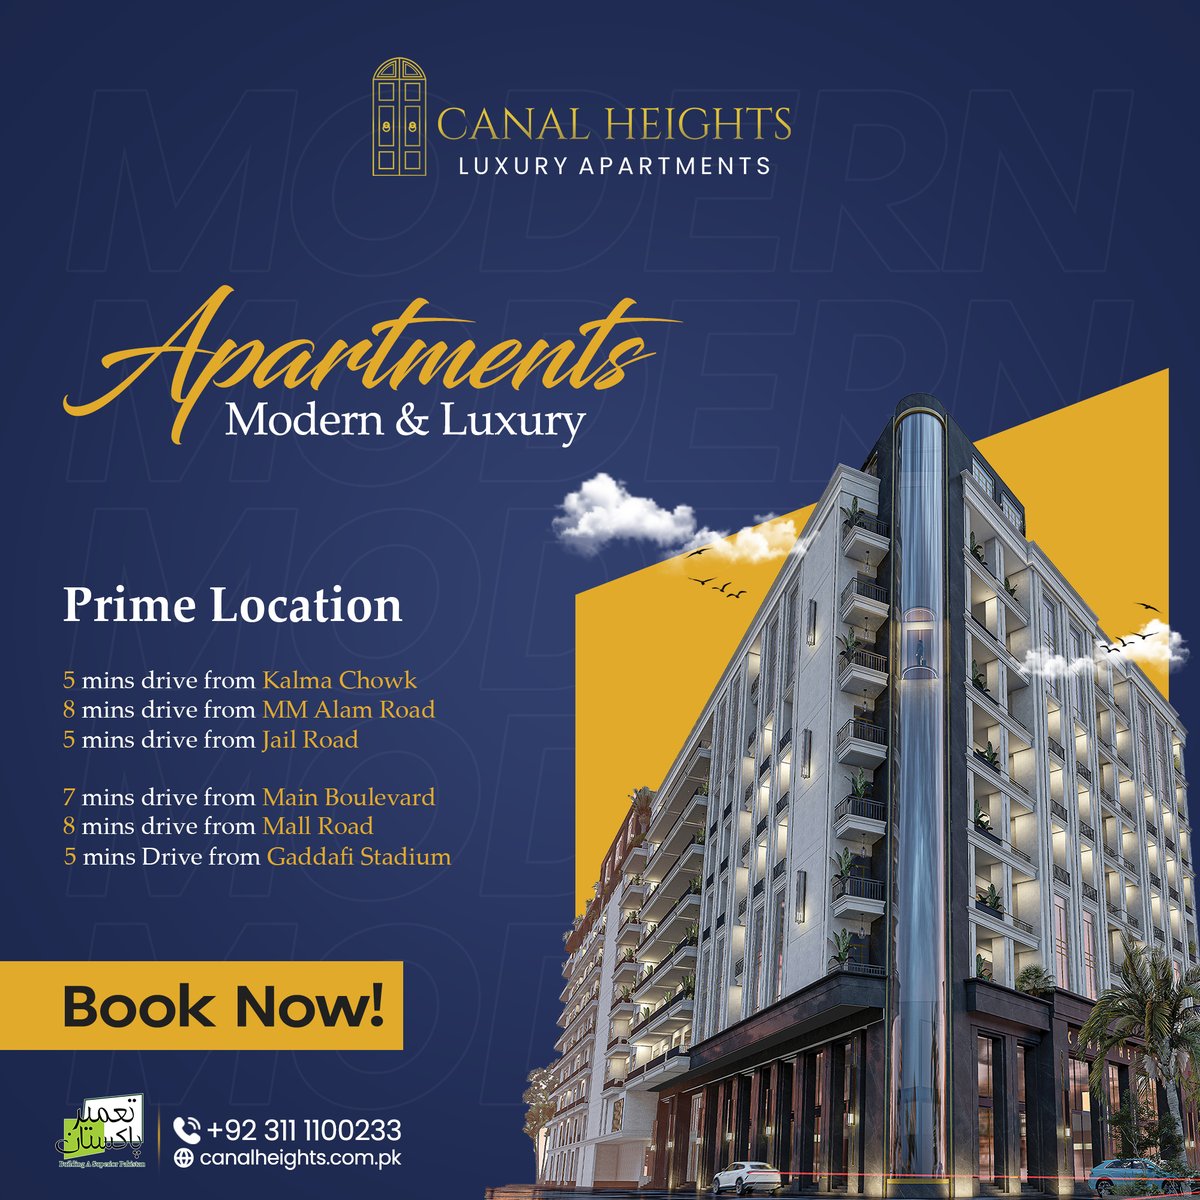 Make CANAL HEIGHTS your new address of distinction. Don't miss out on the chance to call this luxurious haven home – BOOK TODAY!
.
Call Now:
+92-311-1100233 (PK)
+971-50-2890722 (UAE)
.
#tameerpakistan #CanalHeights #LuxuryRealEstate #DreamApartment #LuxuryLifestyle #apartment